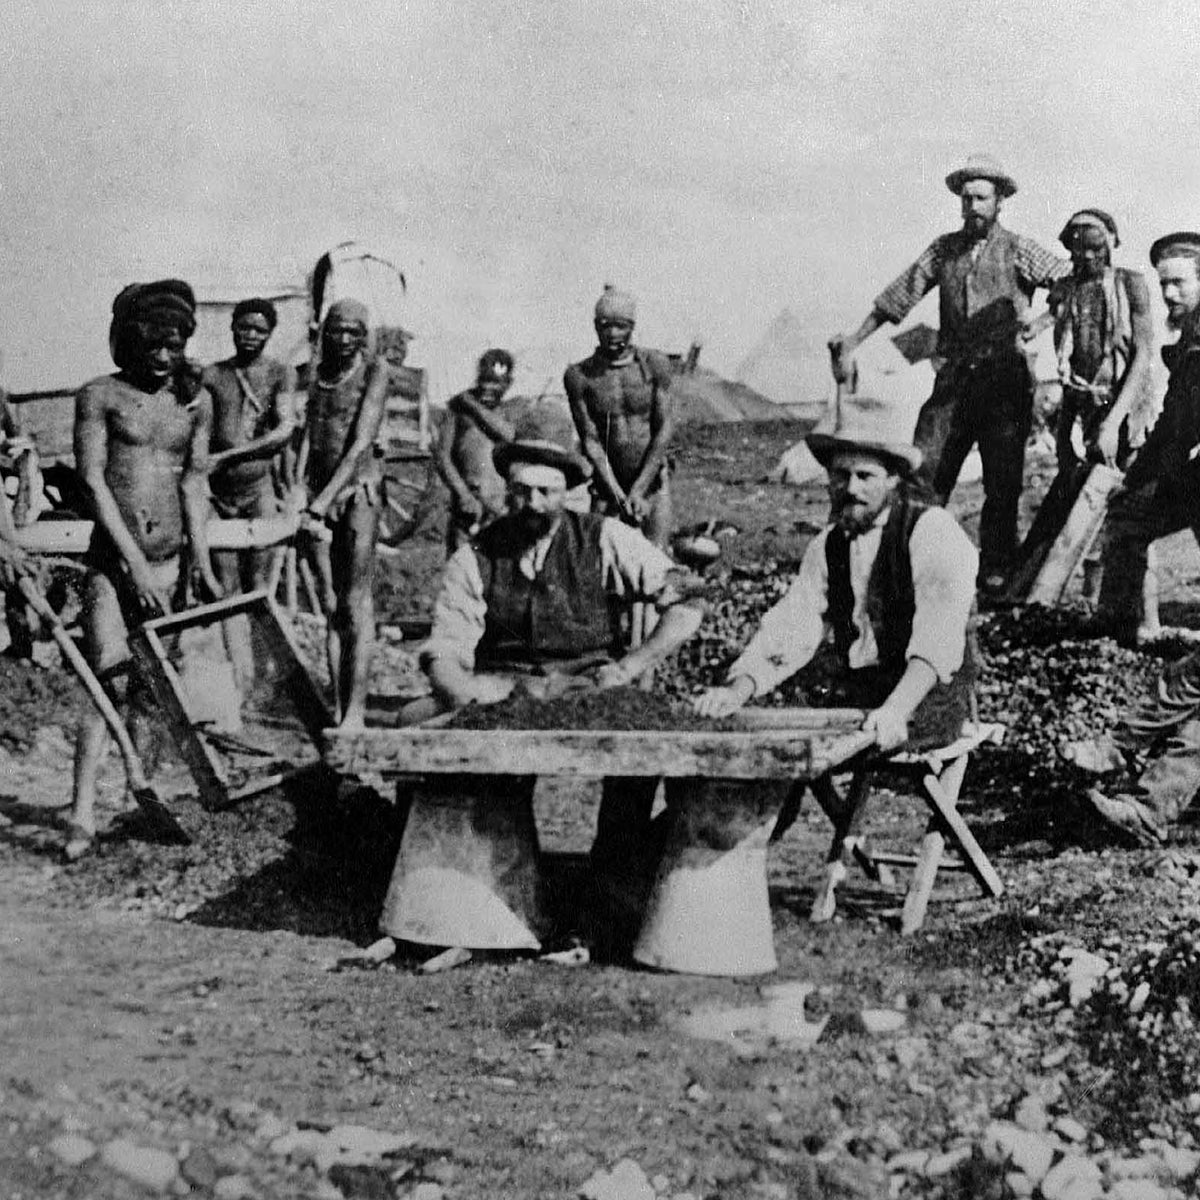 Historical Photograph of Alluvial Mining